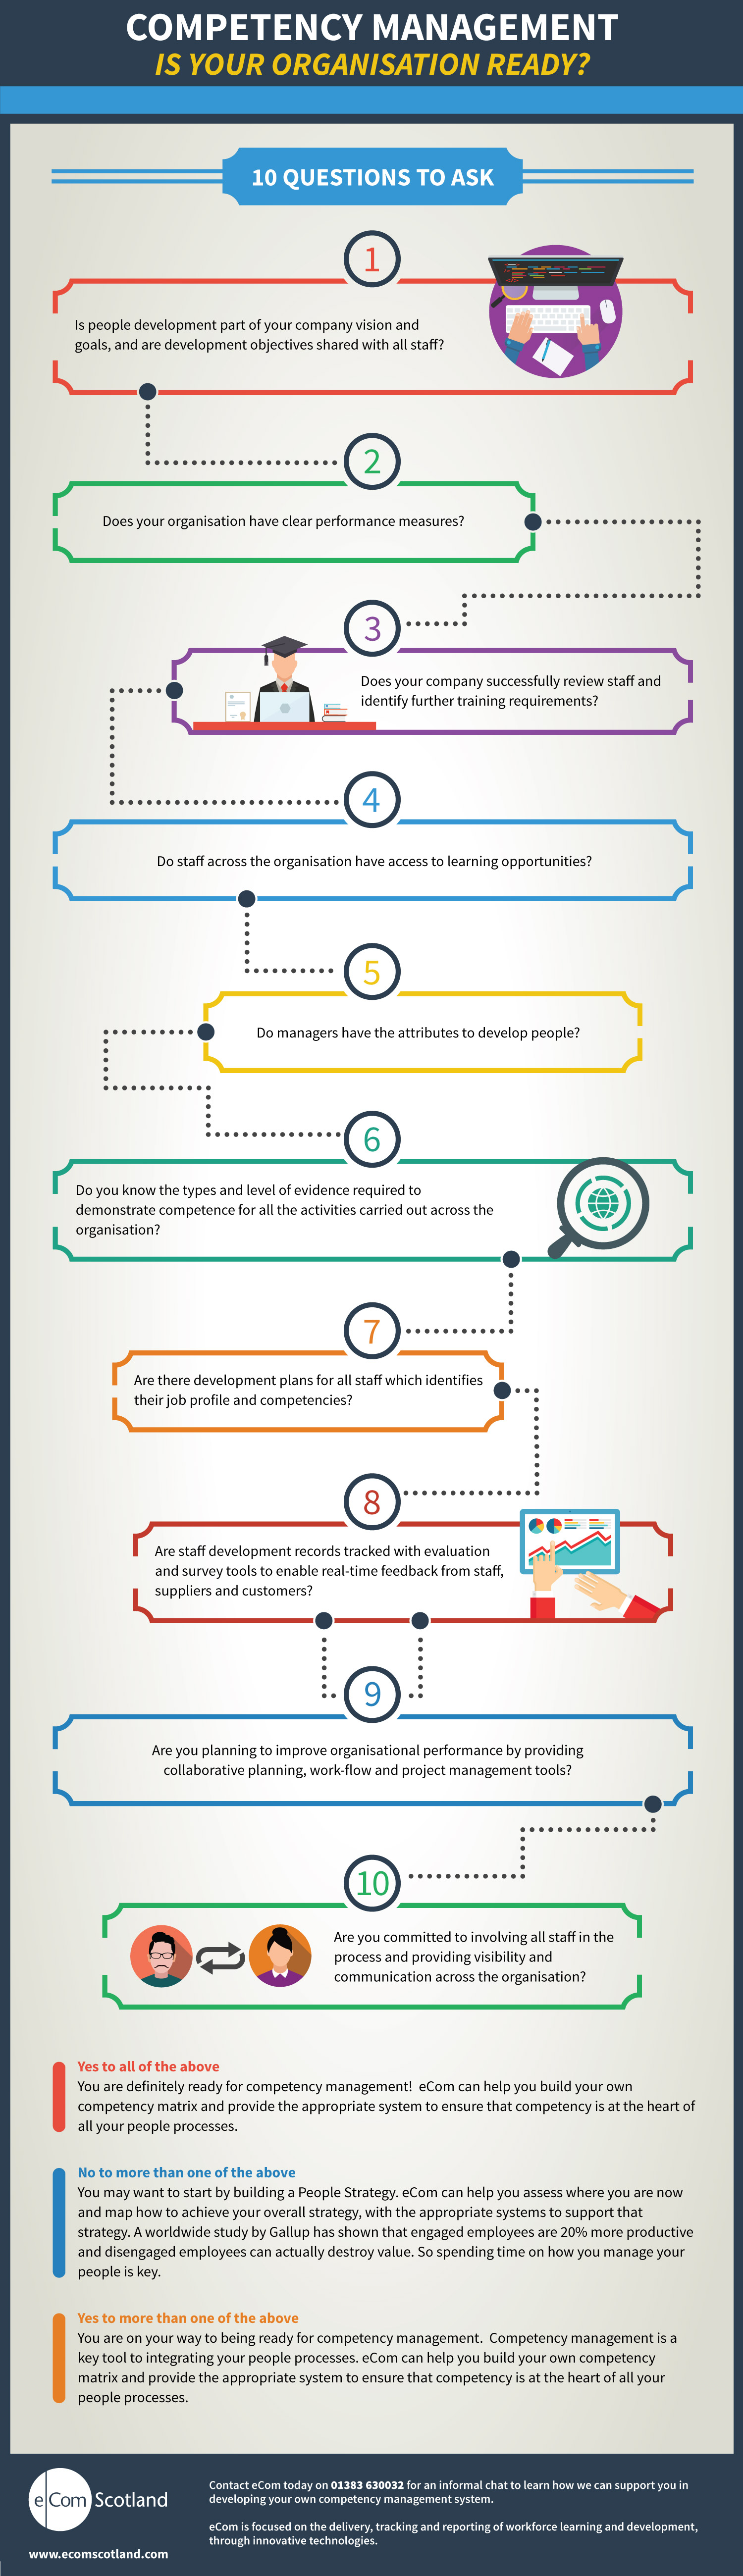 Infographic - Competency Management - Is Your Organisation Ready?